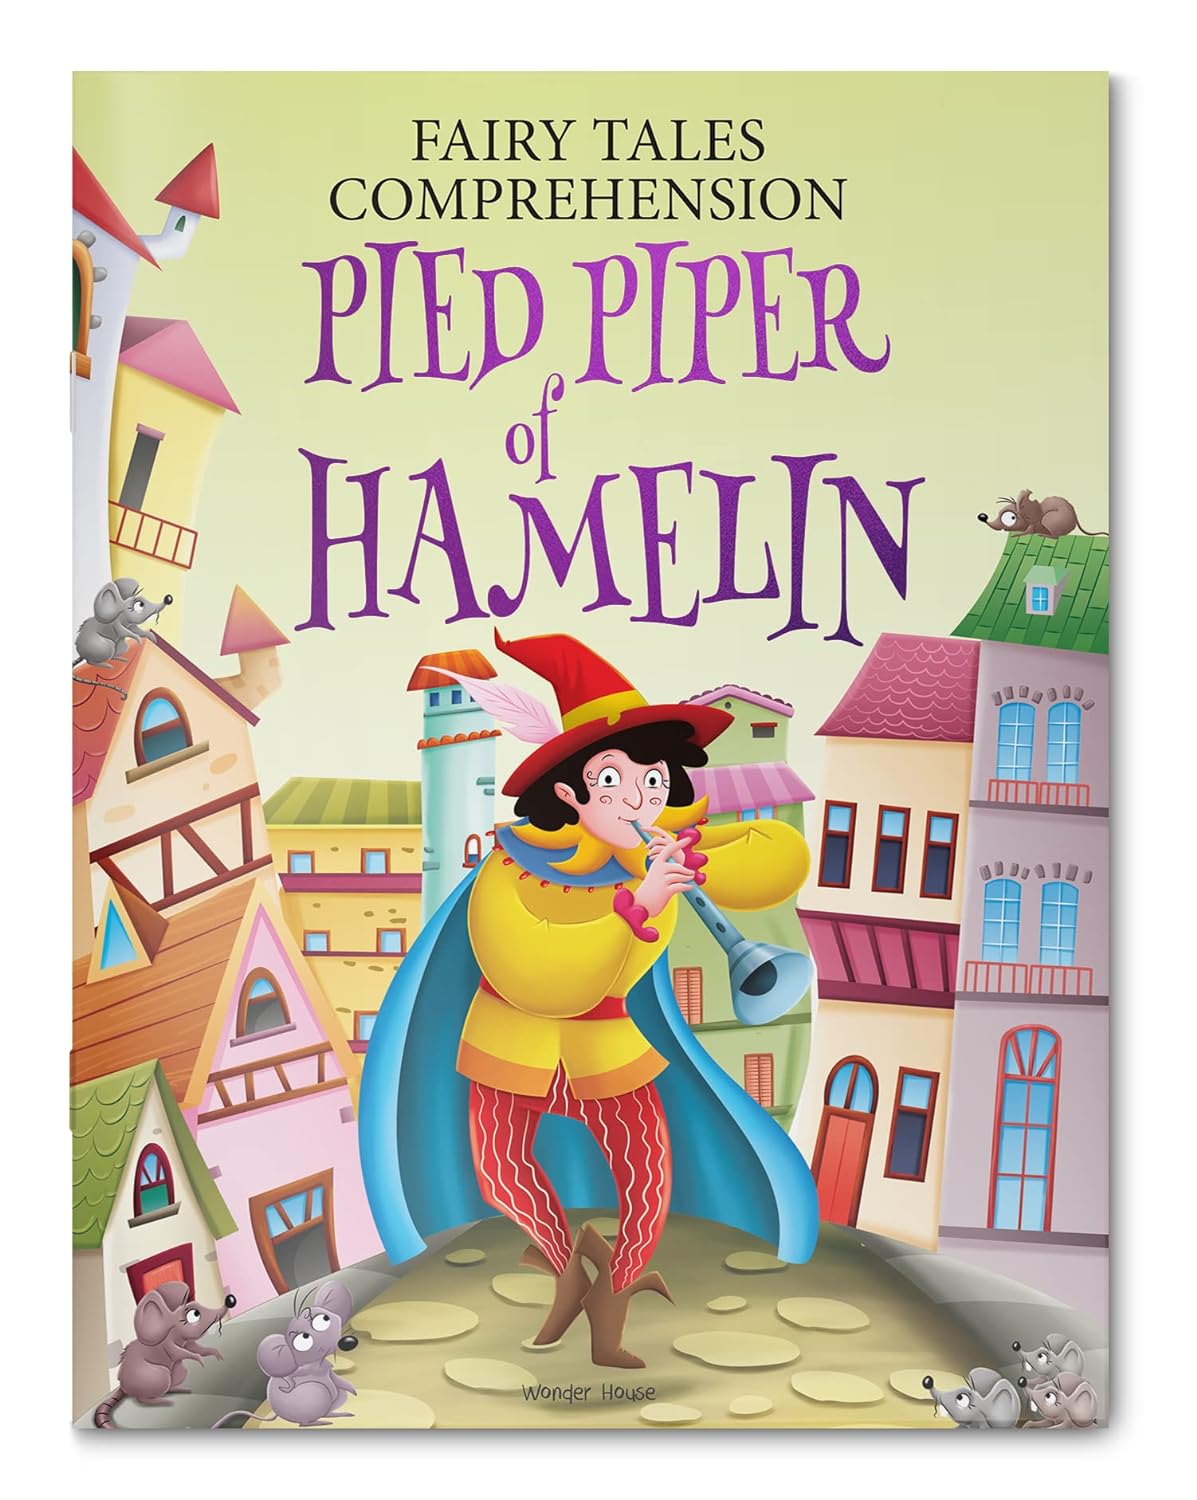 Fairy Tales Comprehension: Pied Piper of Hamelin